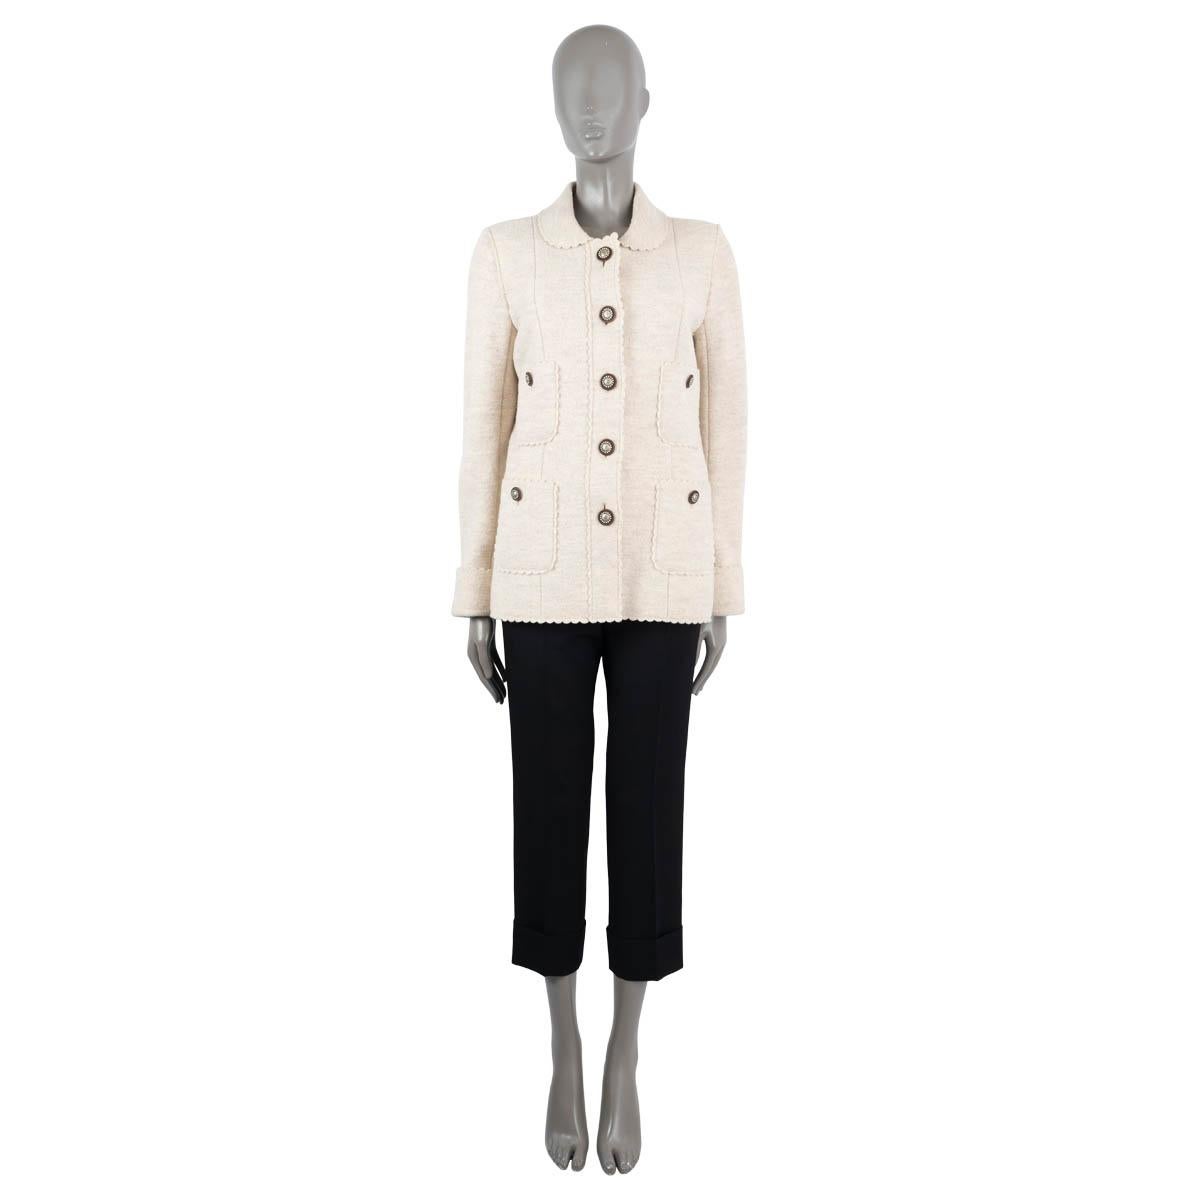 100% authentic Chanel jacket in cream wool (100%). Featuring four patch pockets on the front, a peter pan collar and scalloped edges. Closes with buttons on the front and is lined in silk (100%). Has been worn and is in excellent condition.

2014